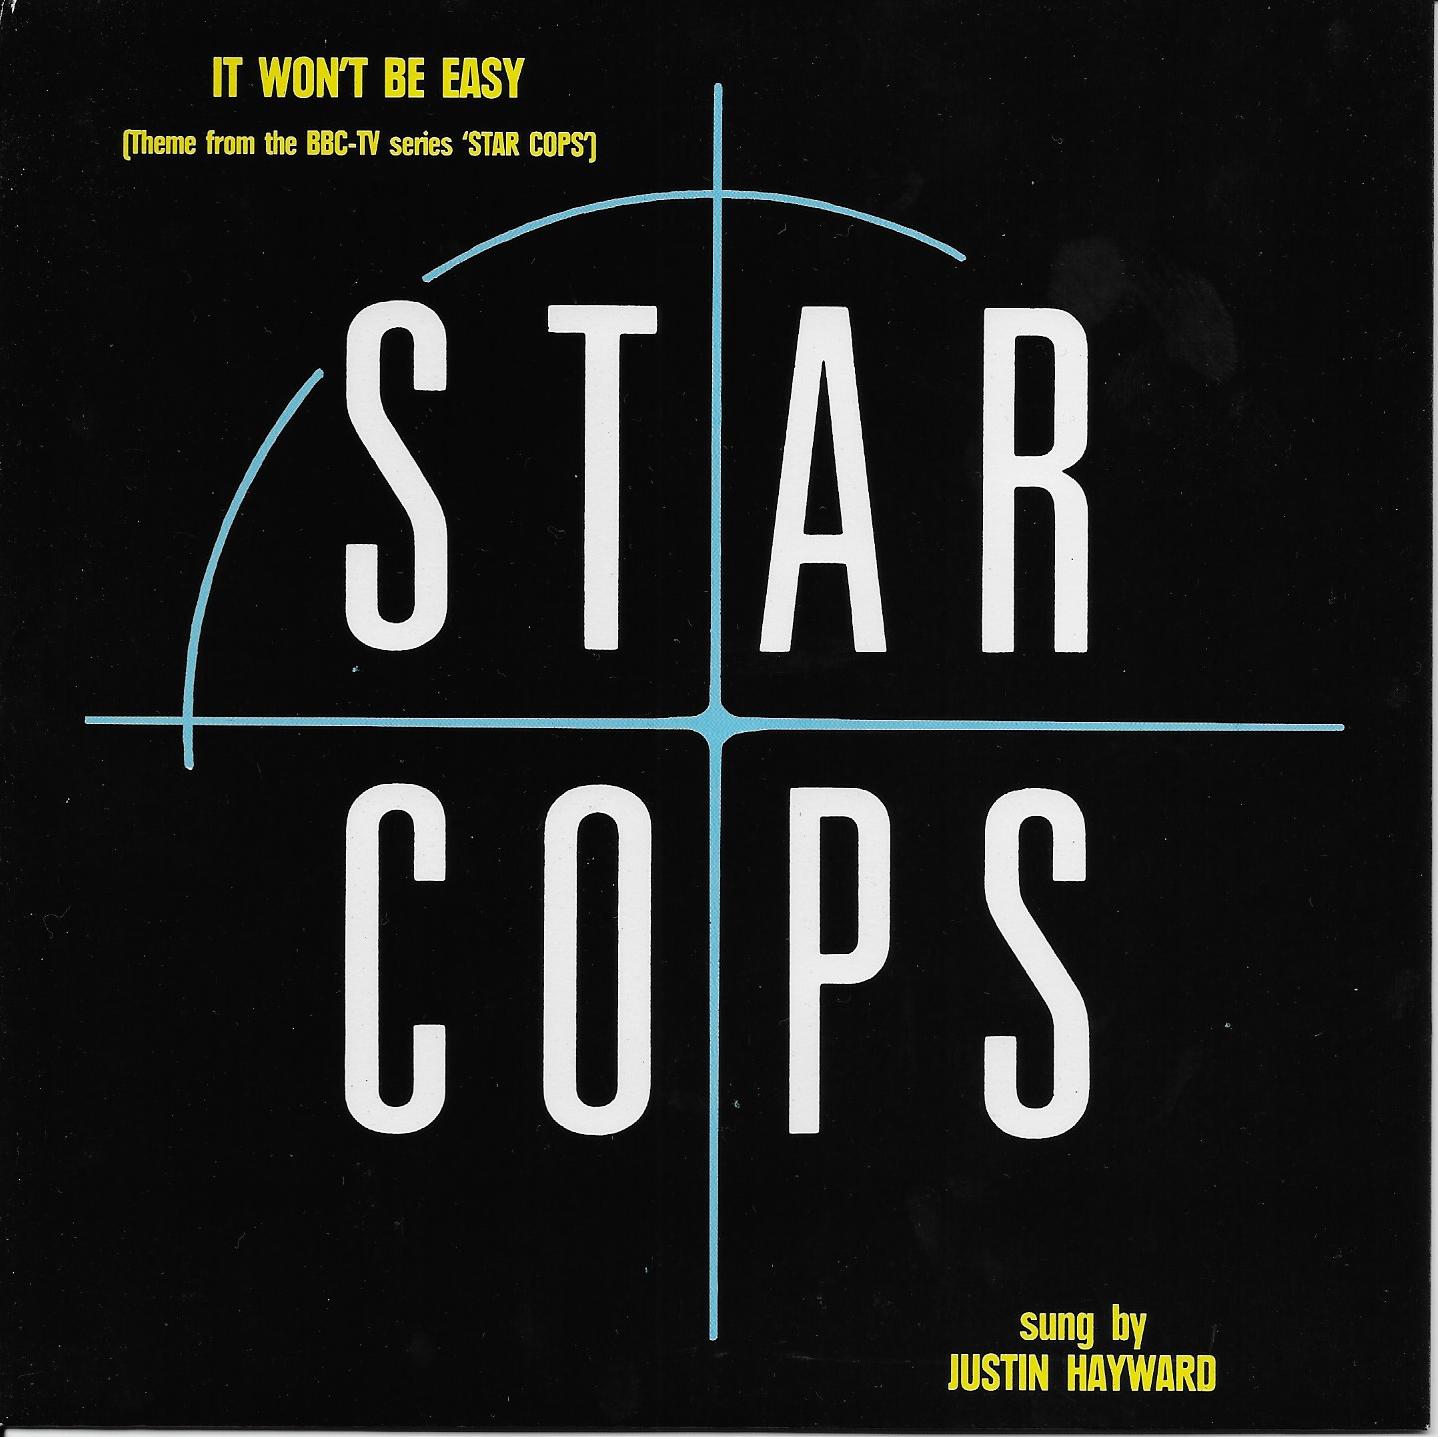 Picture of RESL 208 It won't be easy (Star cops) single by artist Justin Hayward from the BBC records and Tapes library